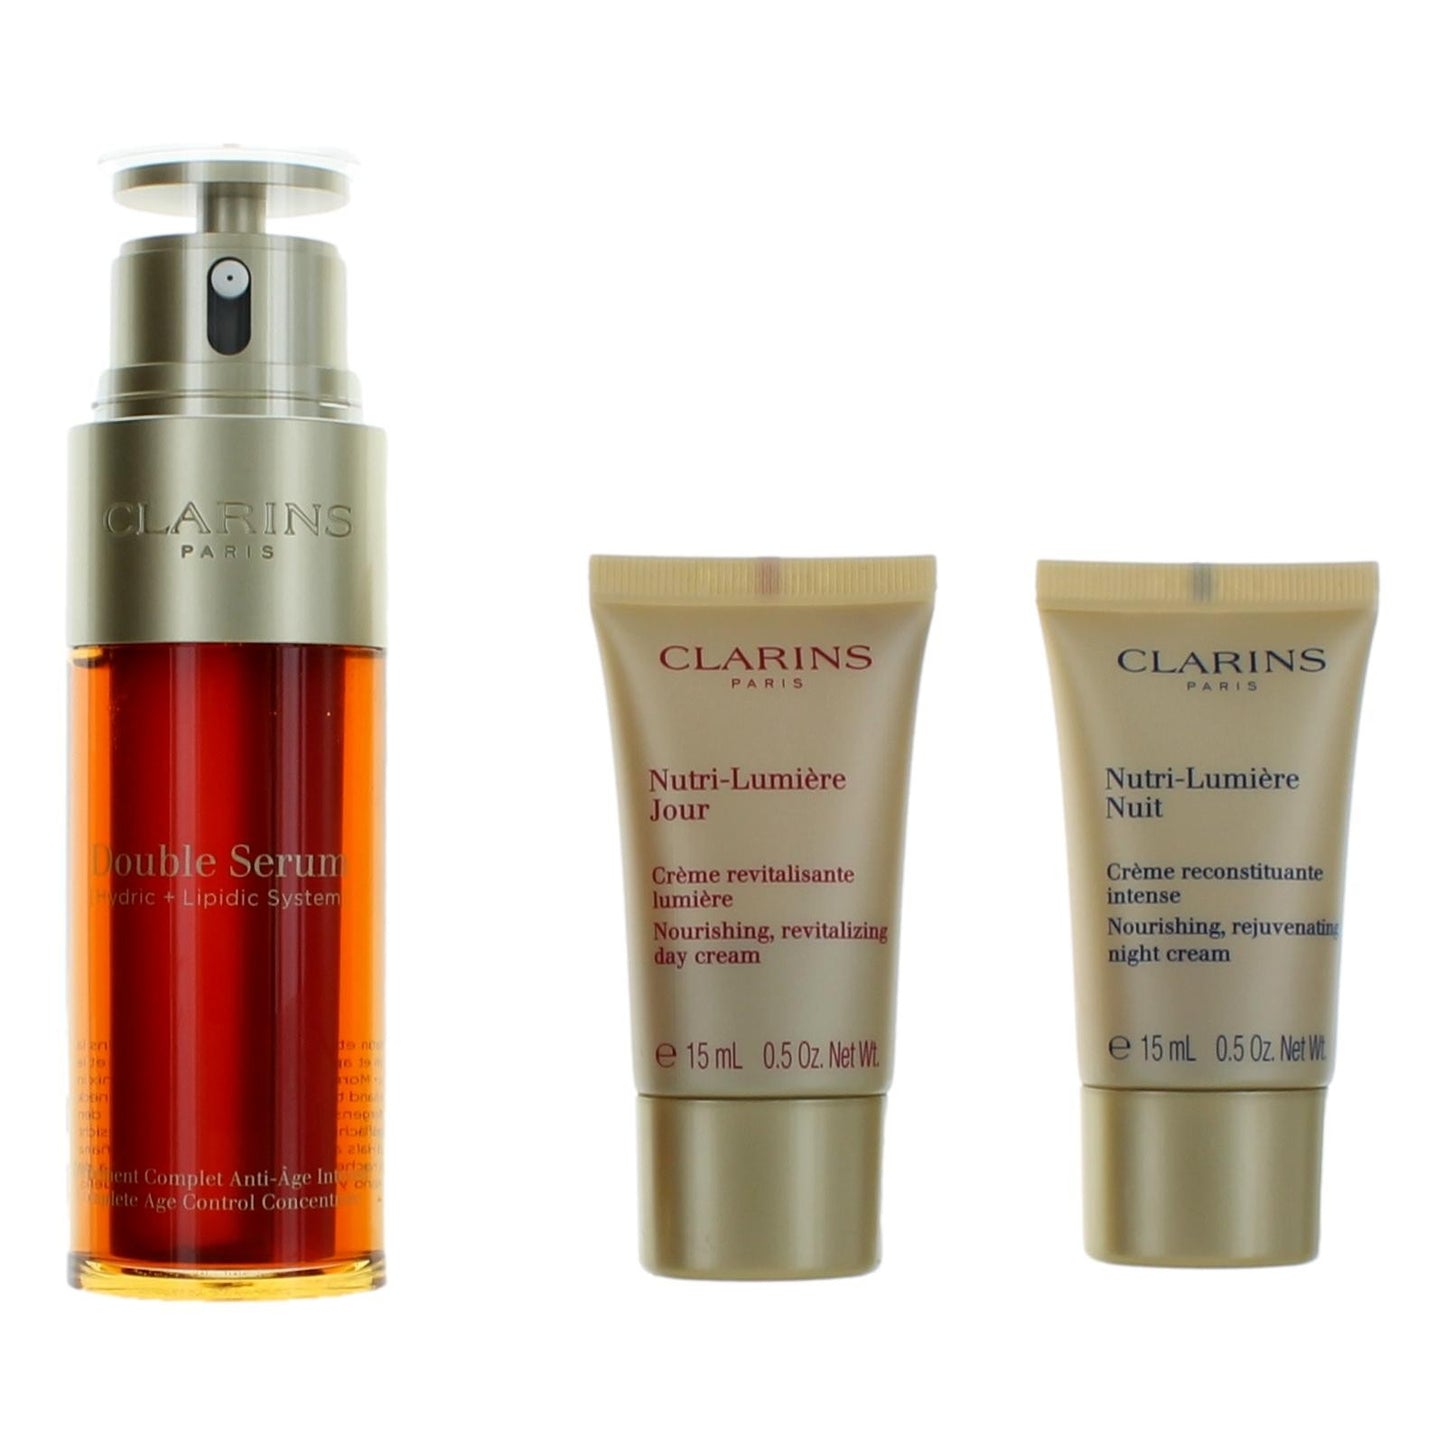 Clarins by Clarins, 3 Piece Age-Defying Set